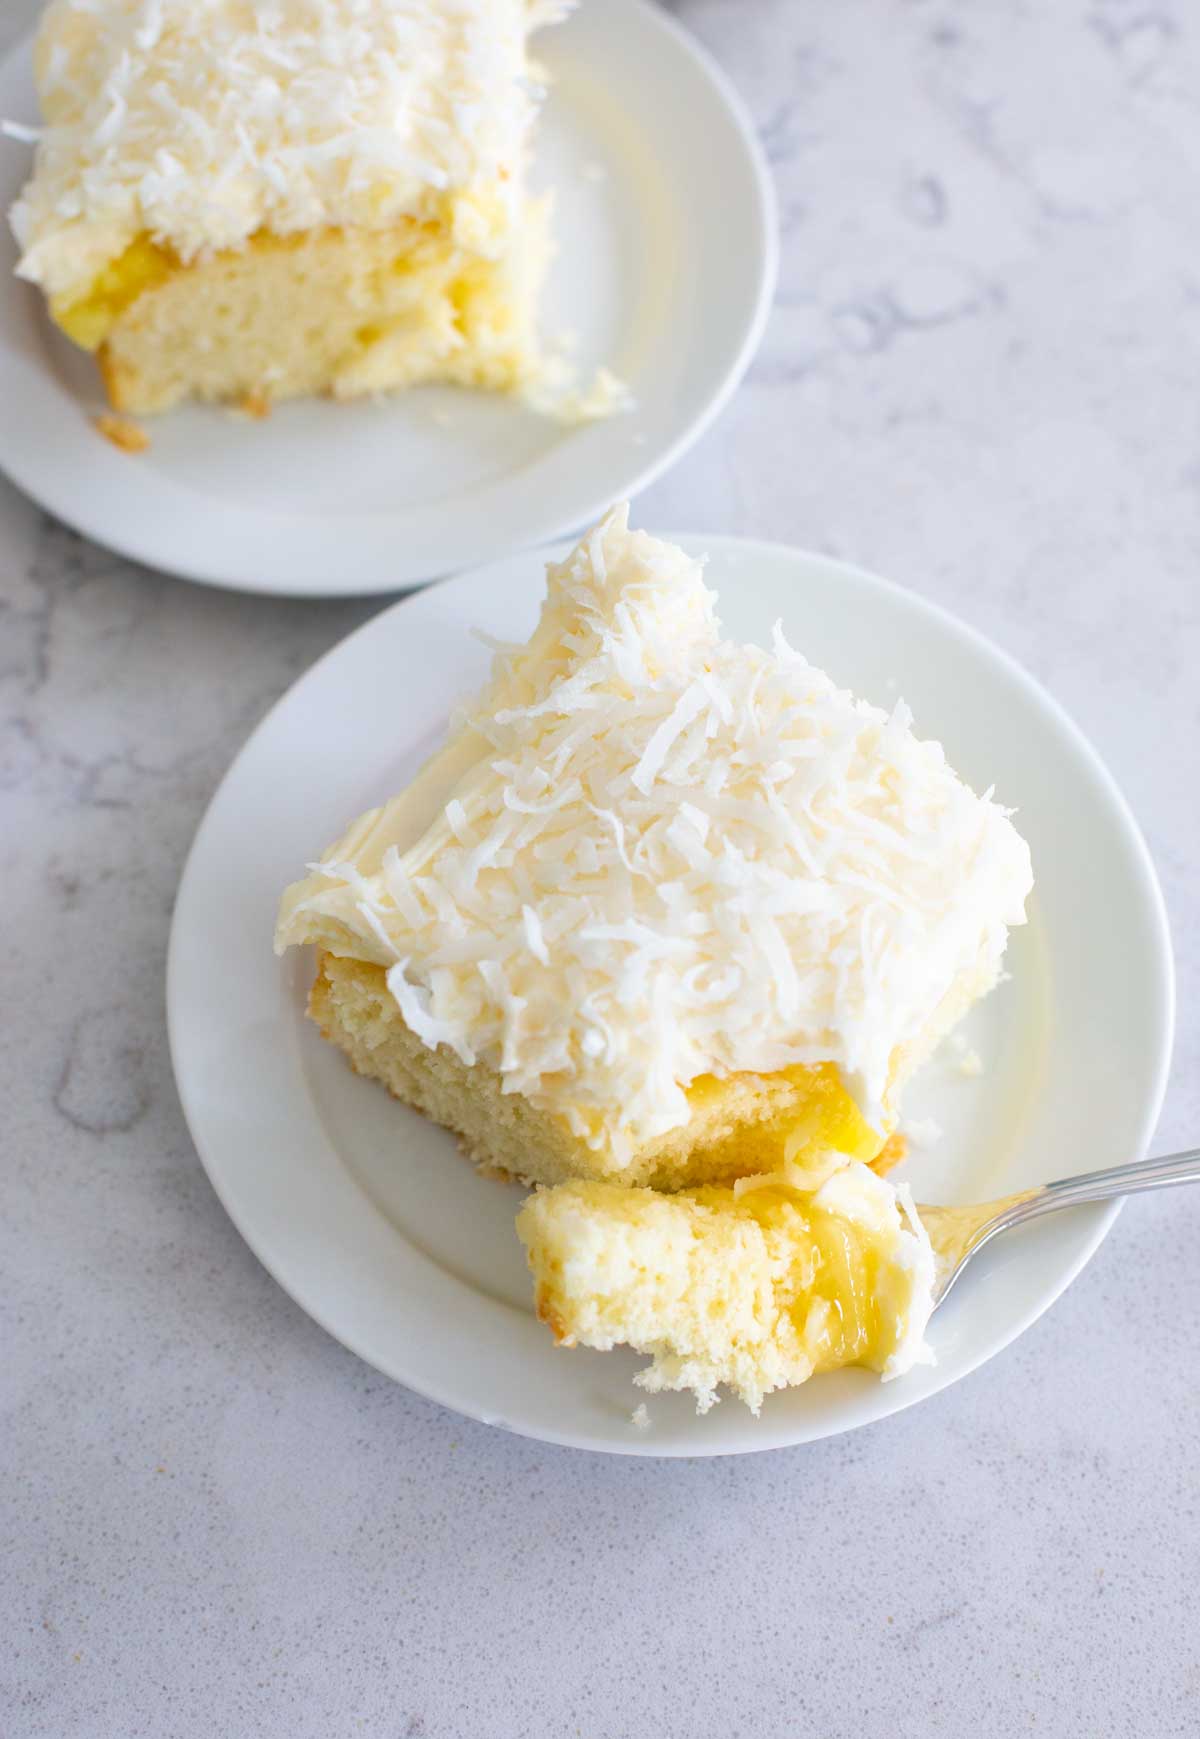 A coconut sheet cake has a layer of pineapple filling under the cream cheese frosting.